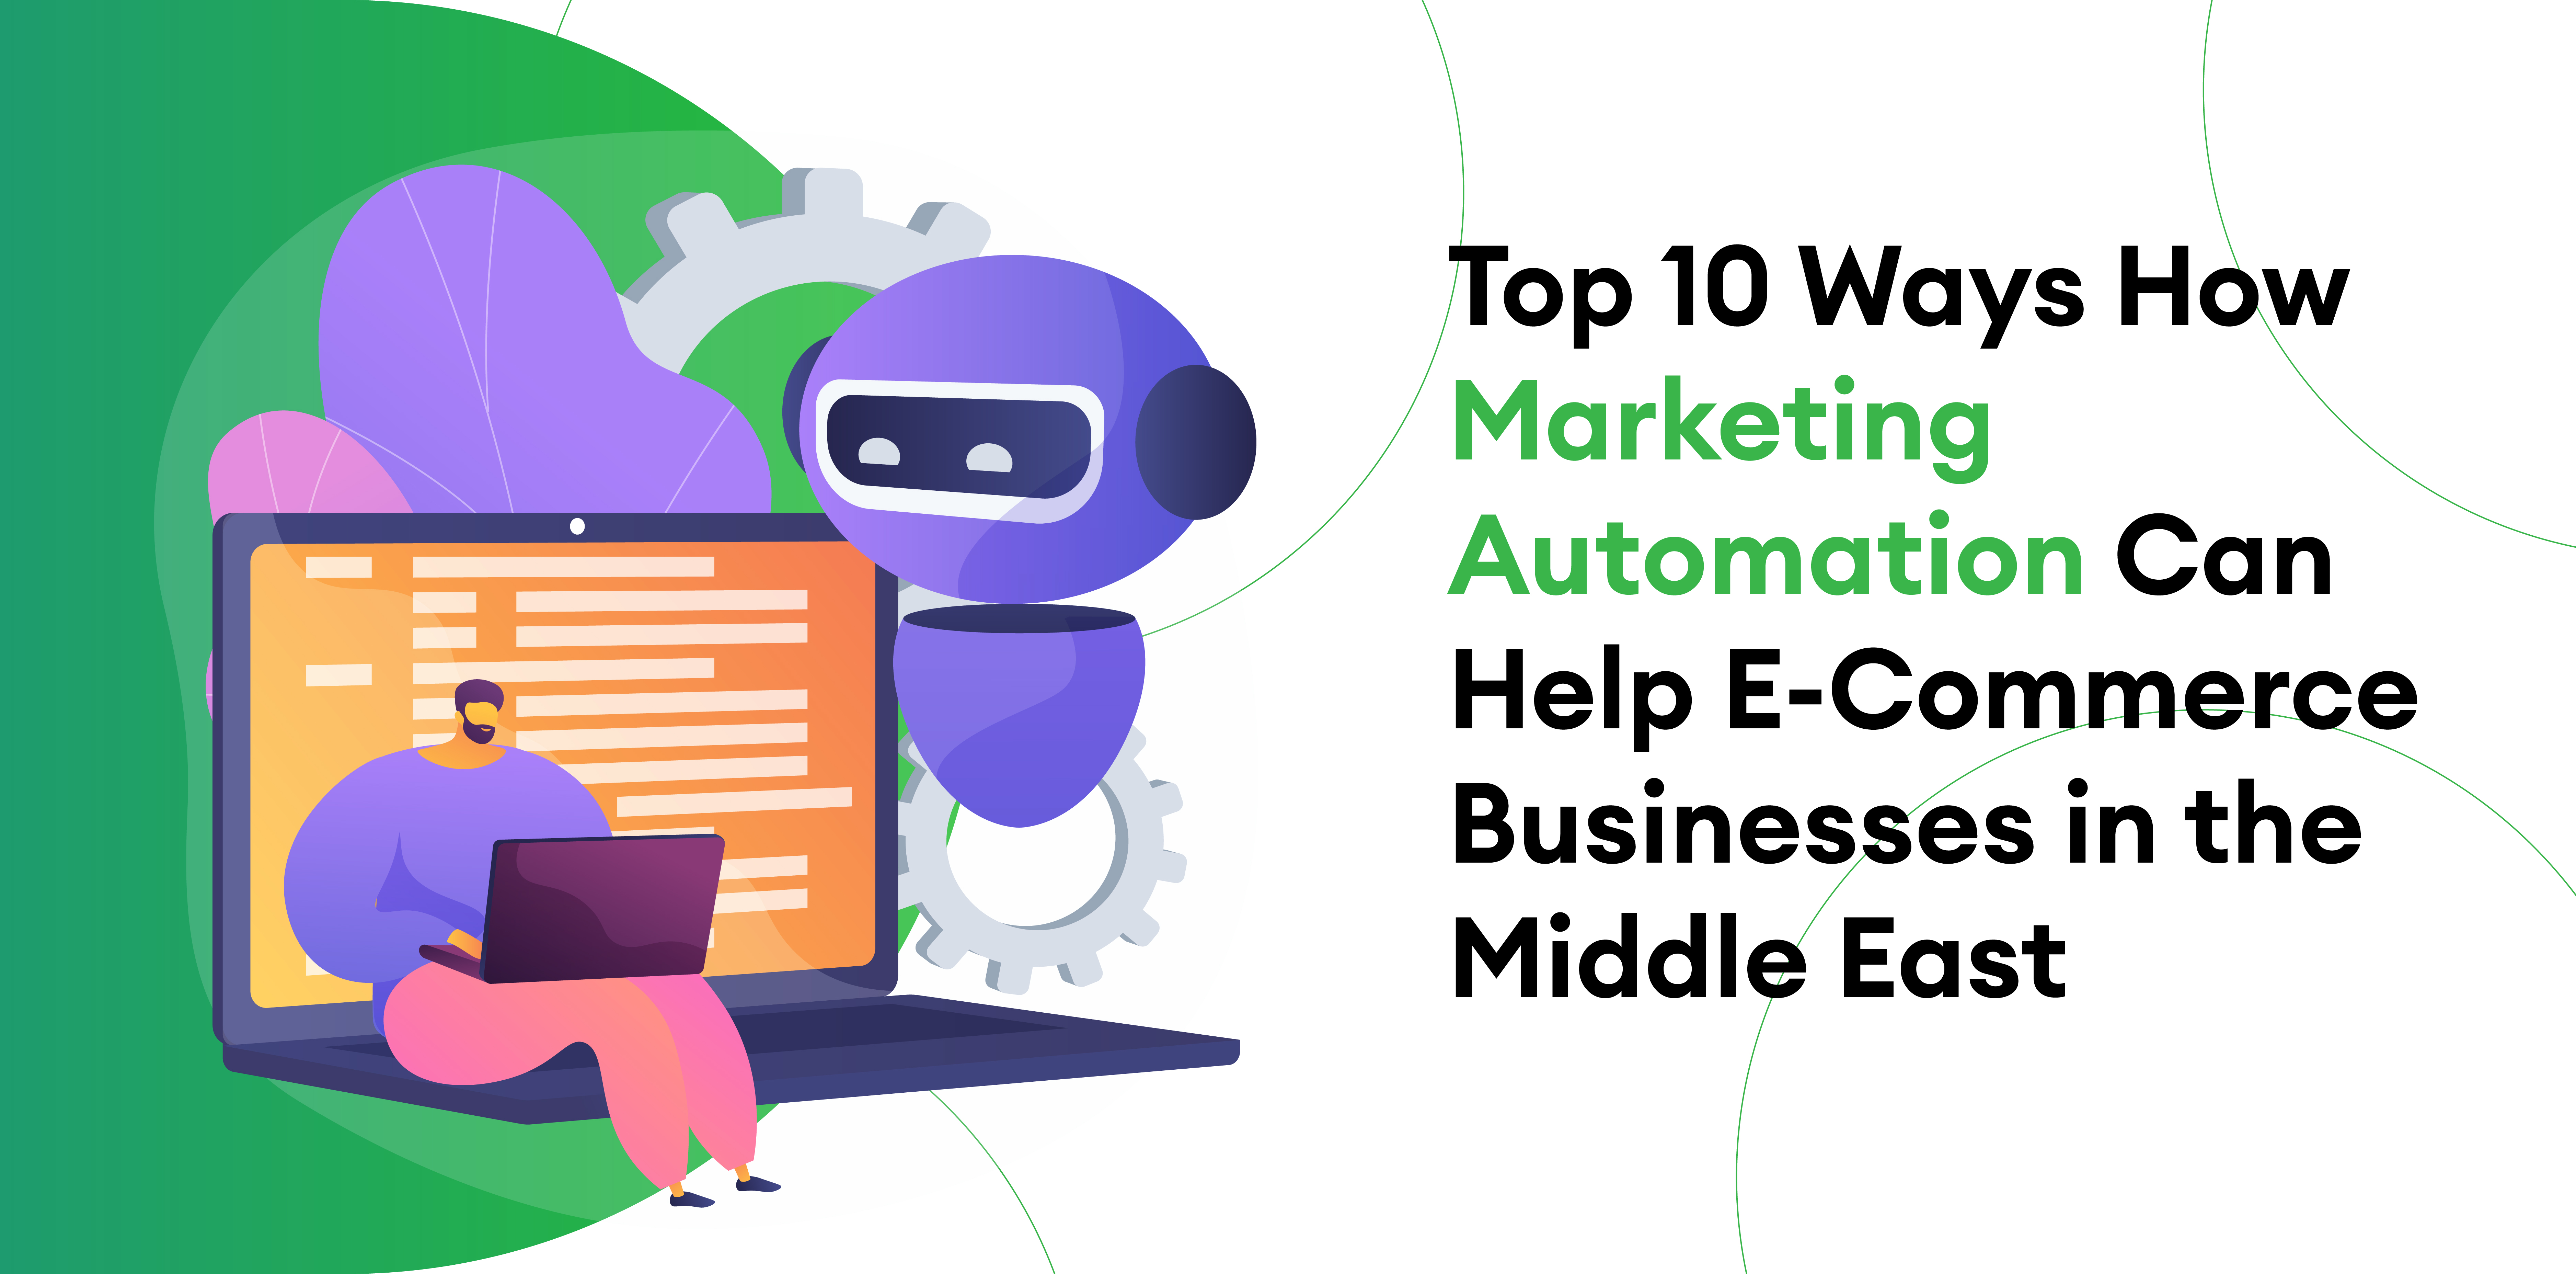 Top 10 Ways How Marketing Automation Can Help E-Commerce Businesses in the Middle East